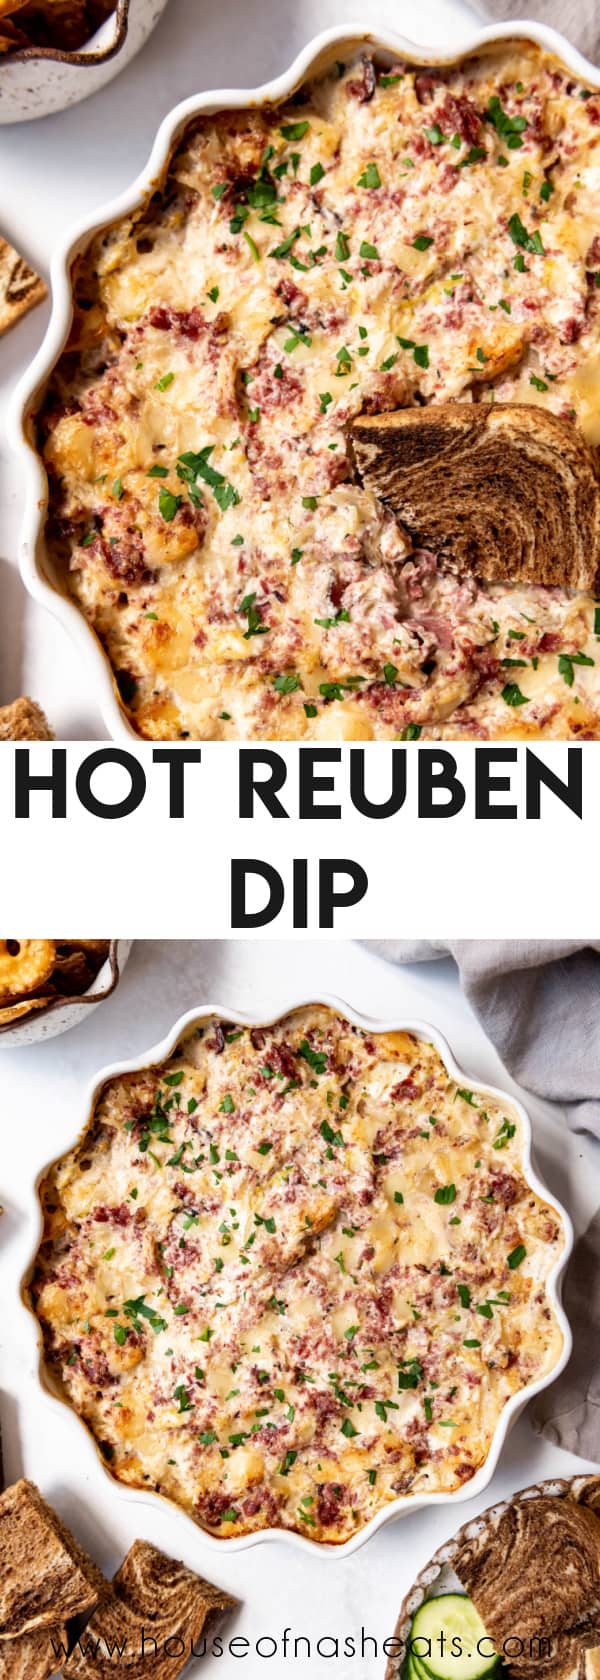 A collage of images of hot reuben dip with text overlay.